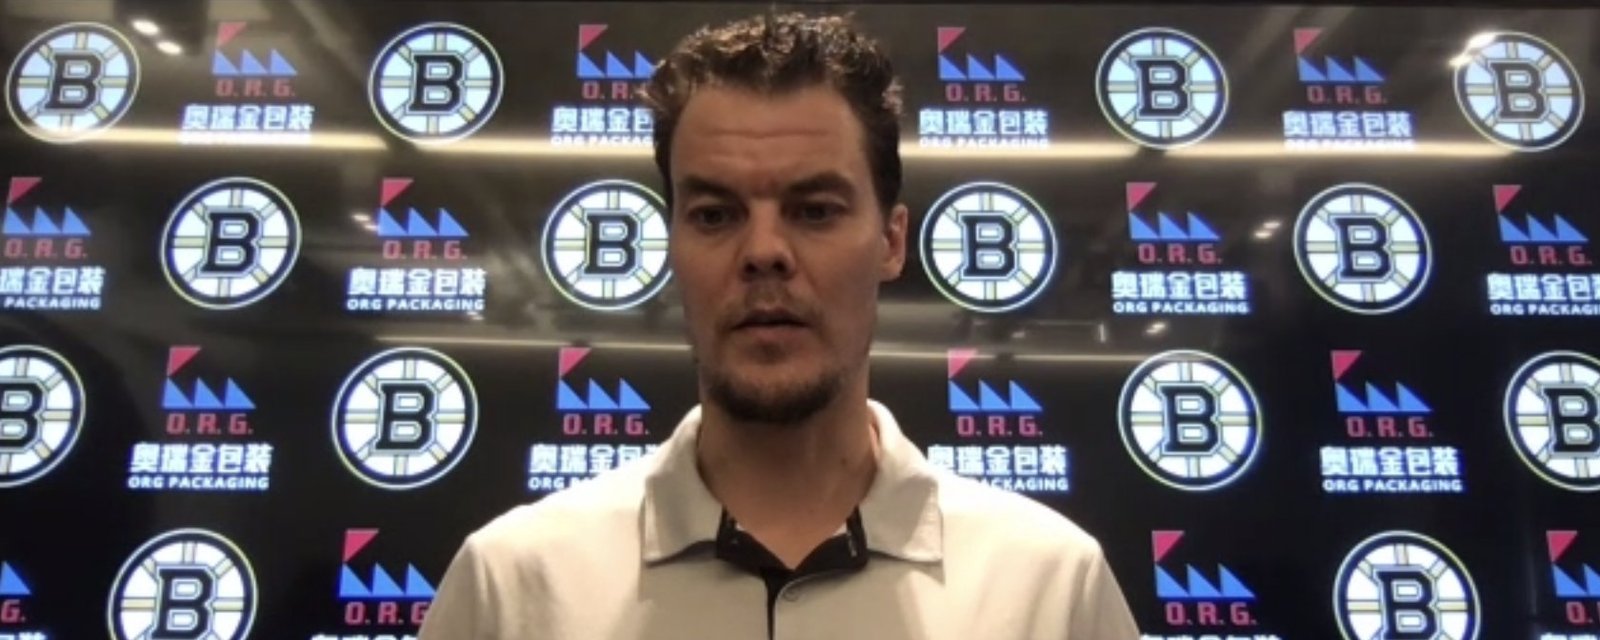 Tuukka Rask makes statement on returning to Bruins despite being sidelined long-term with injury 